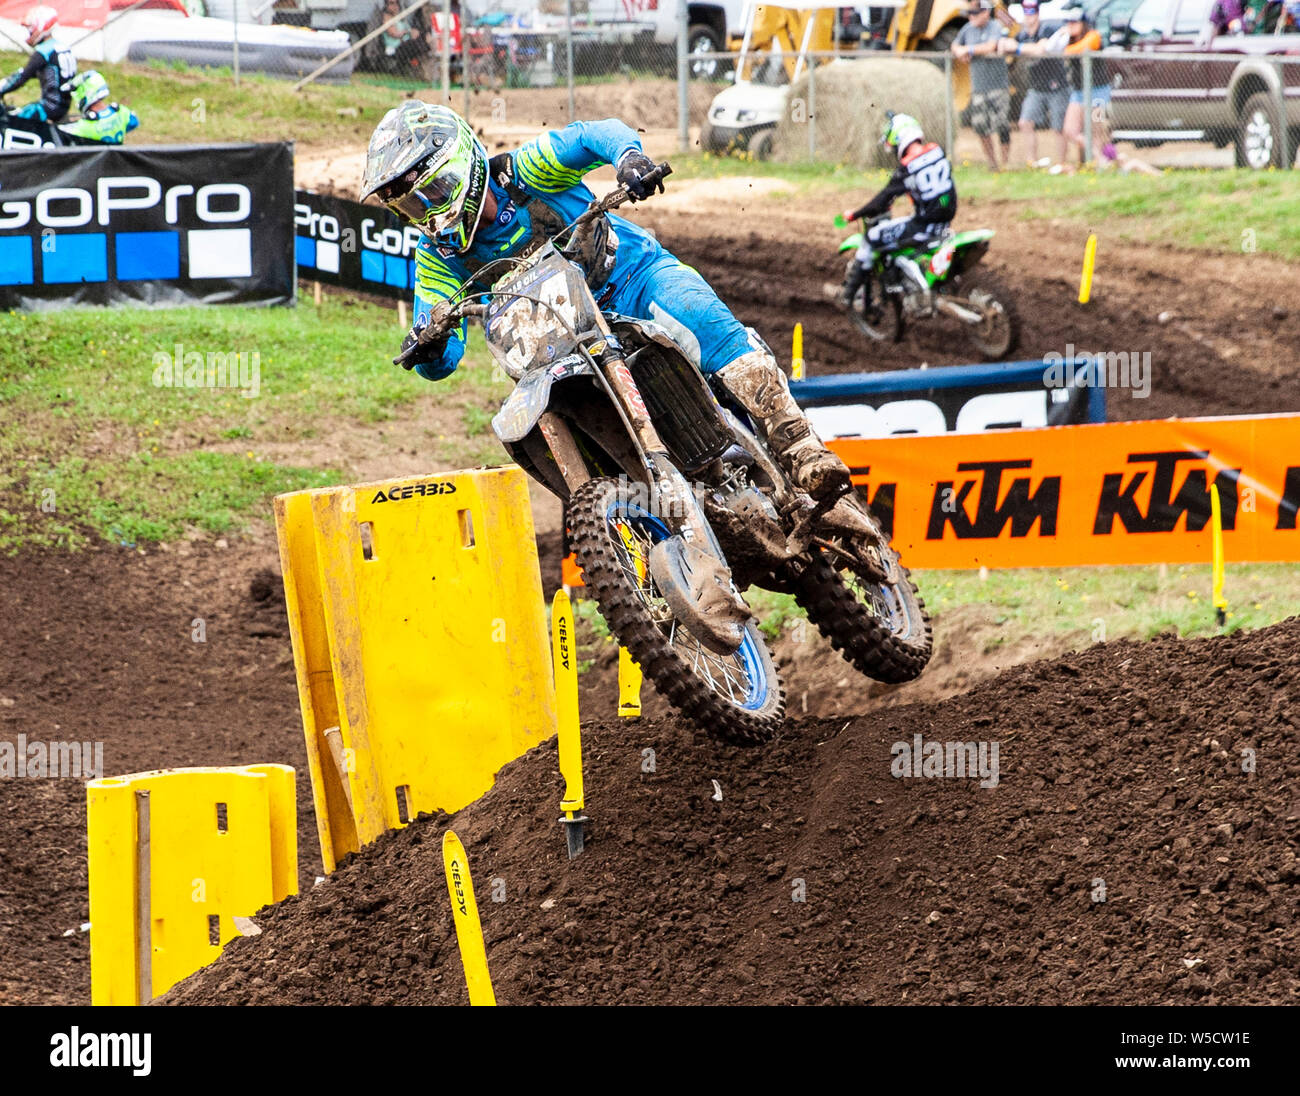 Washougal, USA. 27th July, 2019. # 34 Dylan Ferrandos coming out of turn 30 during the Lucas Oil Pro Motocross Washougal Championship 250 class moto # 1 at Washougal MX park Washougal, WA Thurman James/CSM/Alamy Live News Stock Photo